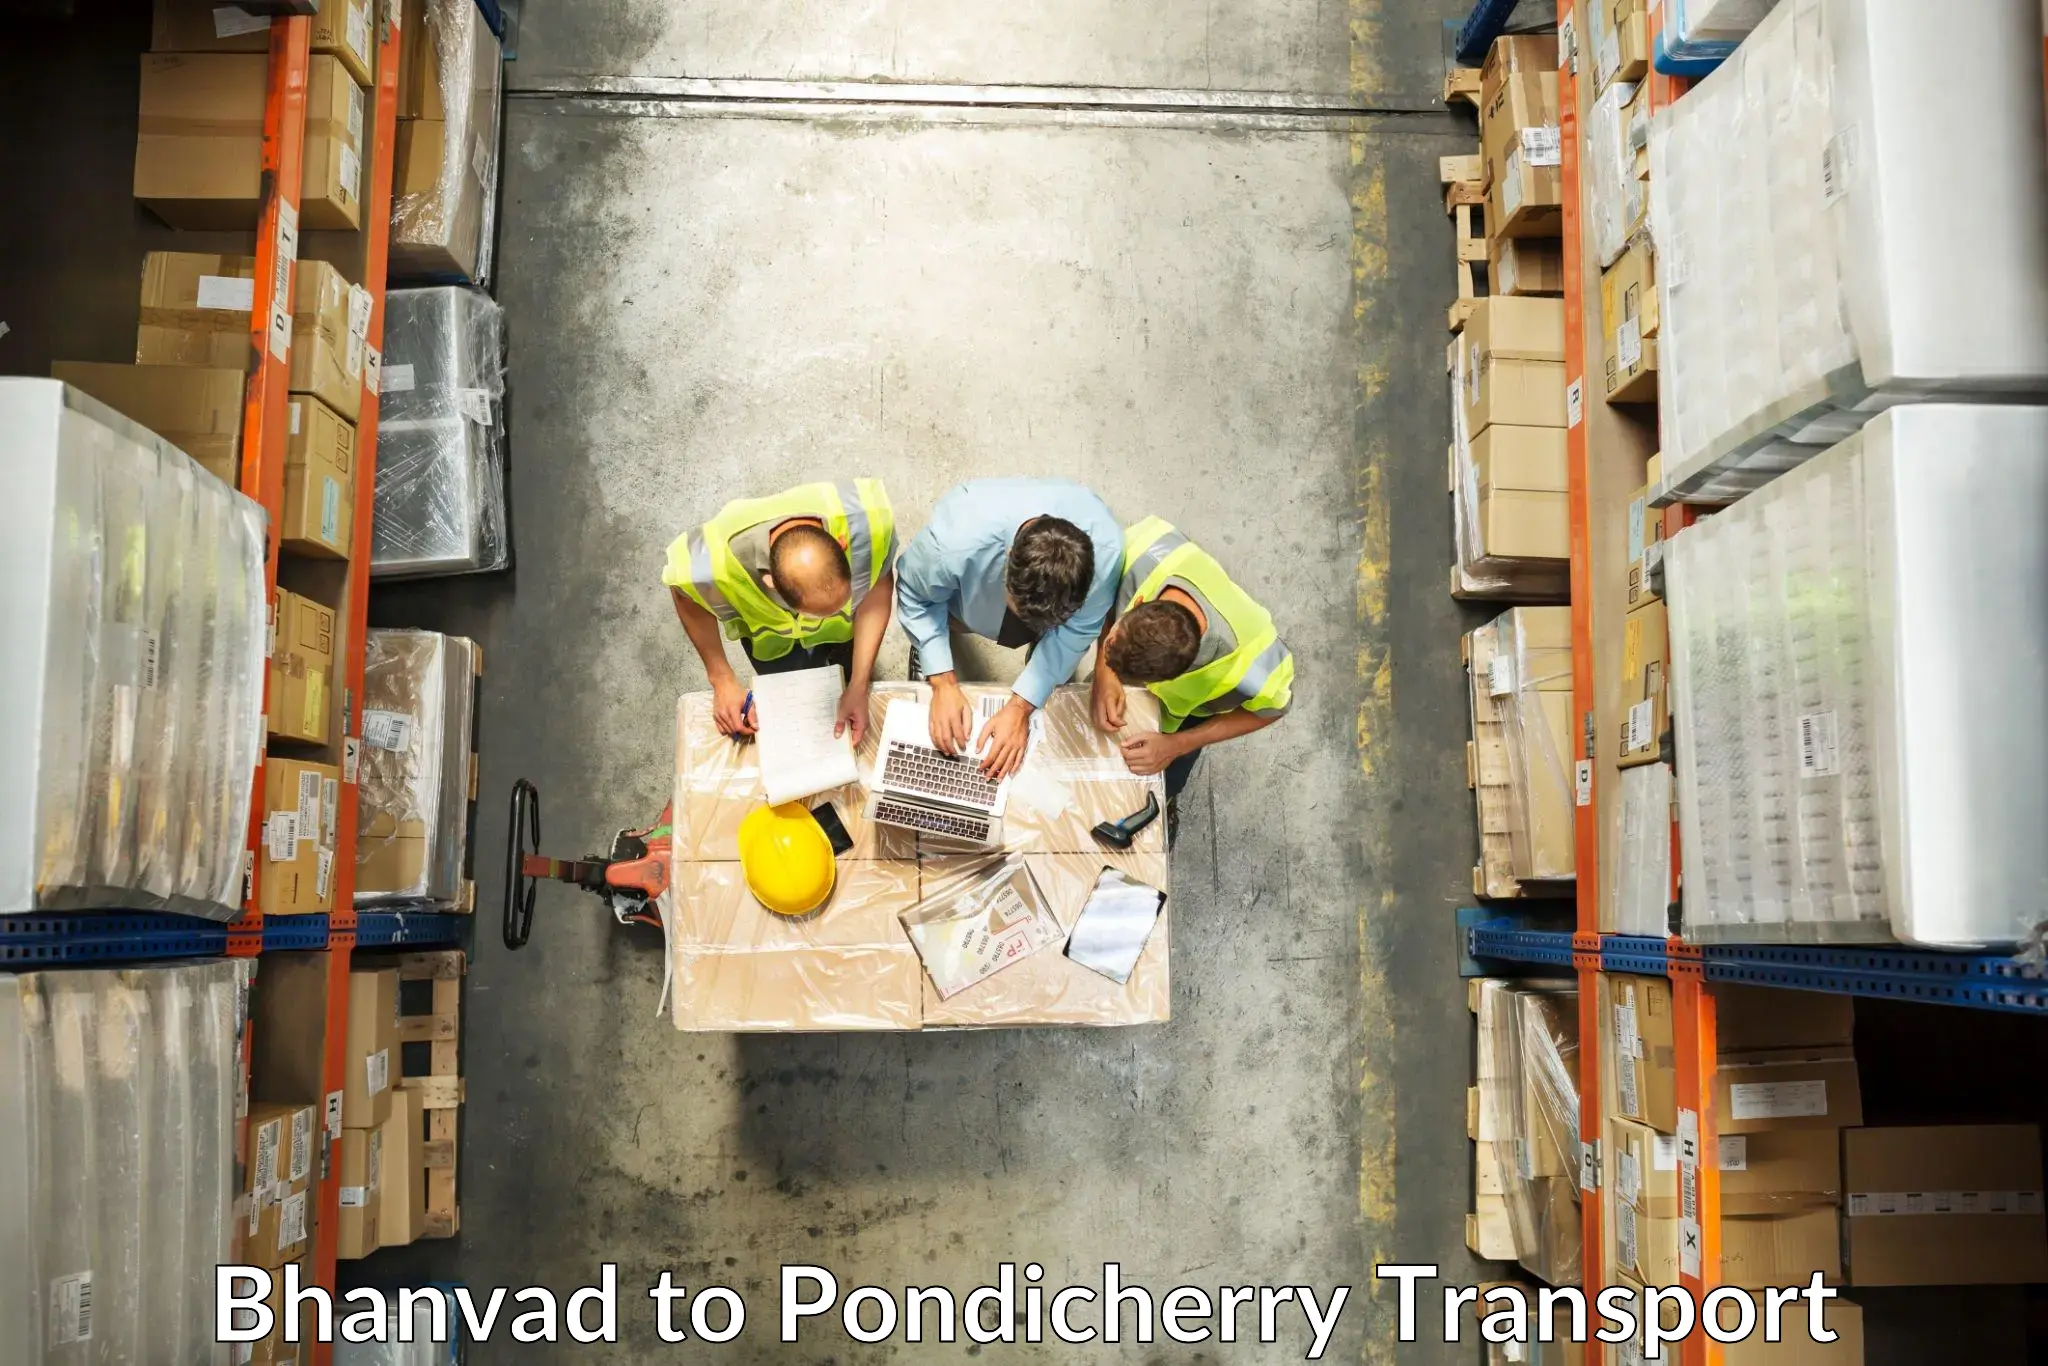 Part load transport service in India Bhanvad to Pondicherry University